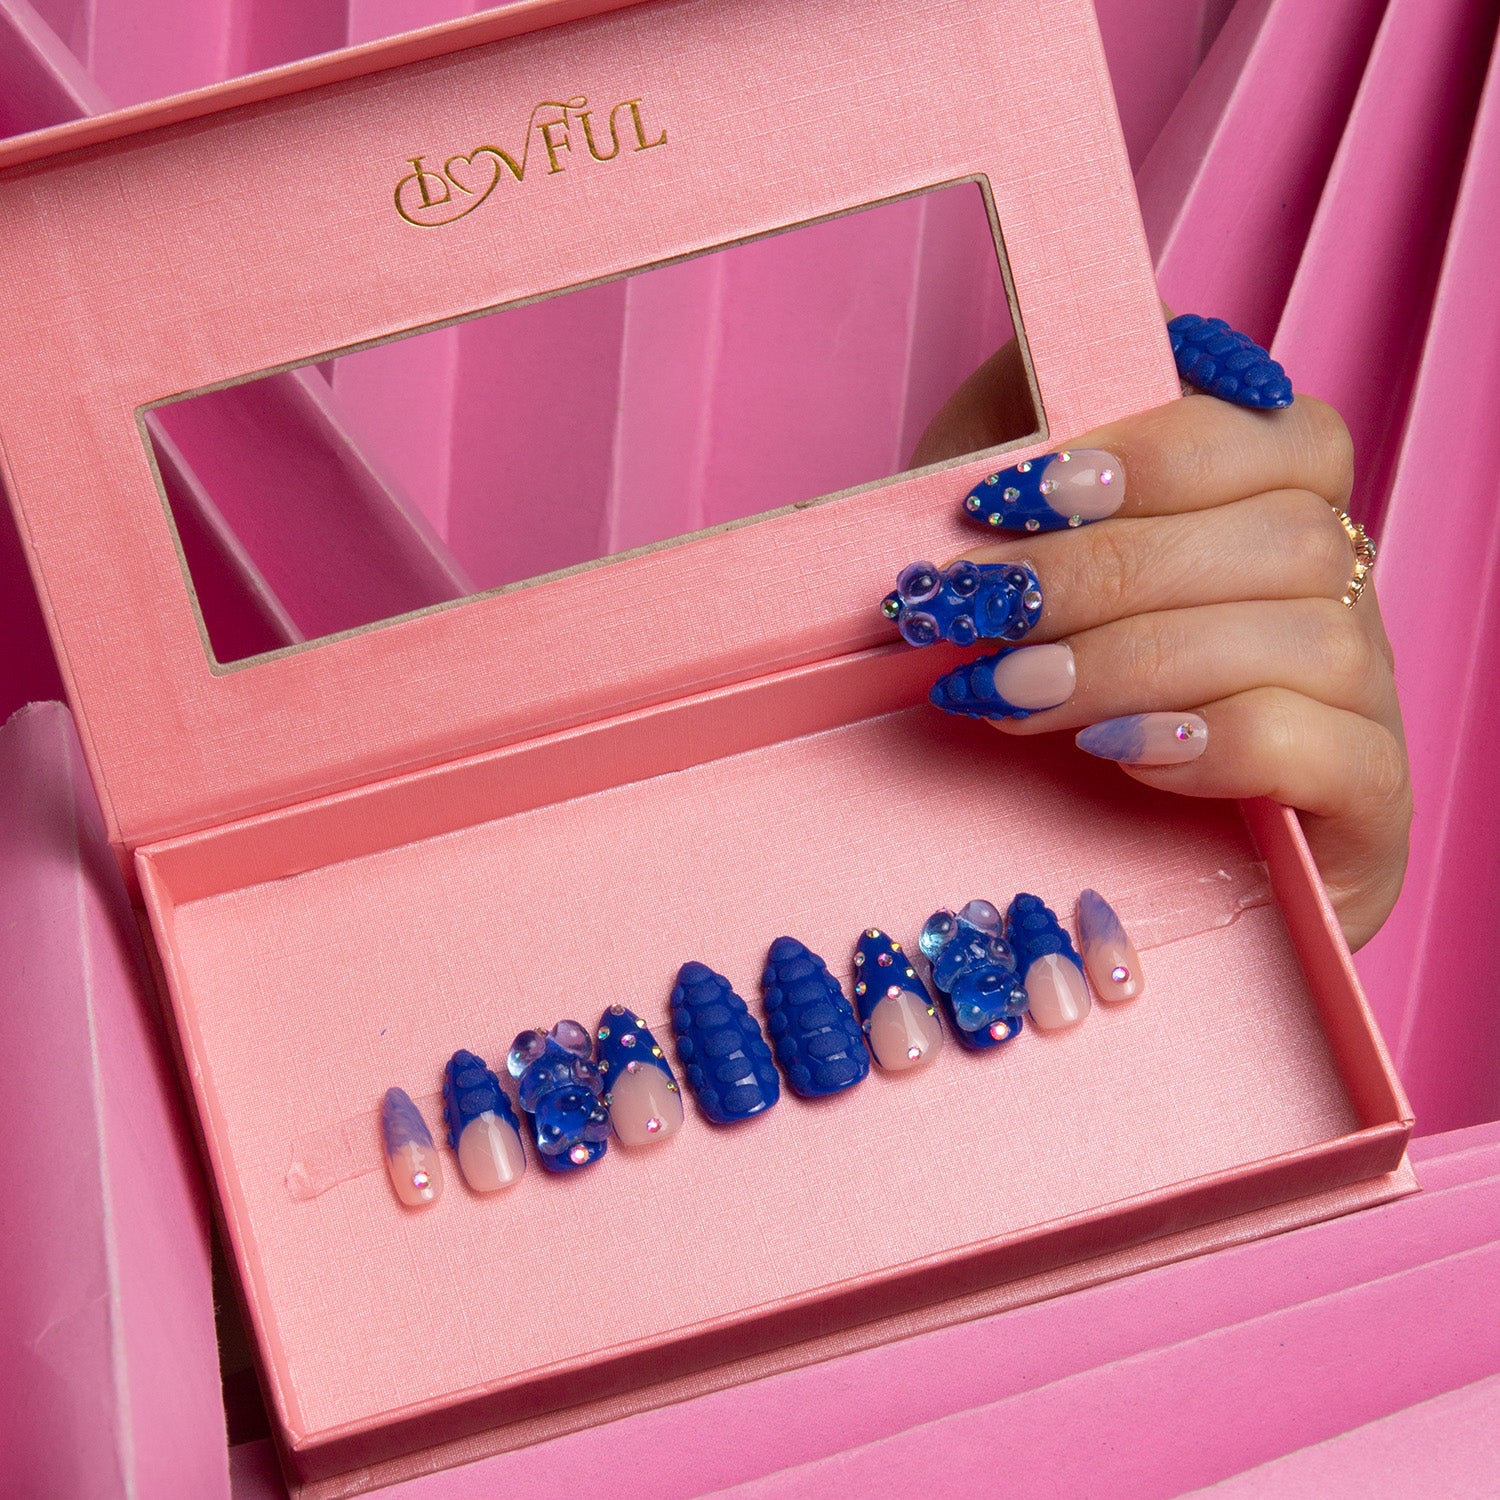 Set of 'Little Blue Bear' press-on nails by Lovful in a pink display box, featuring blue nails with gummy bear decorations and shiny rhinestones.